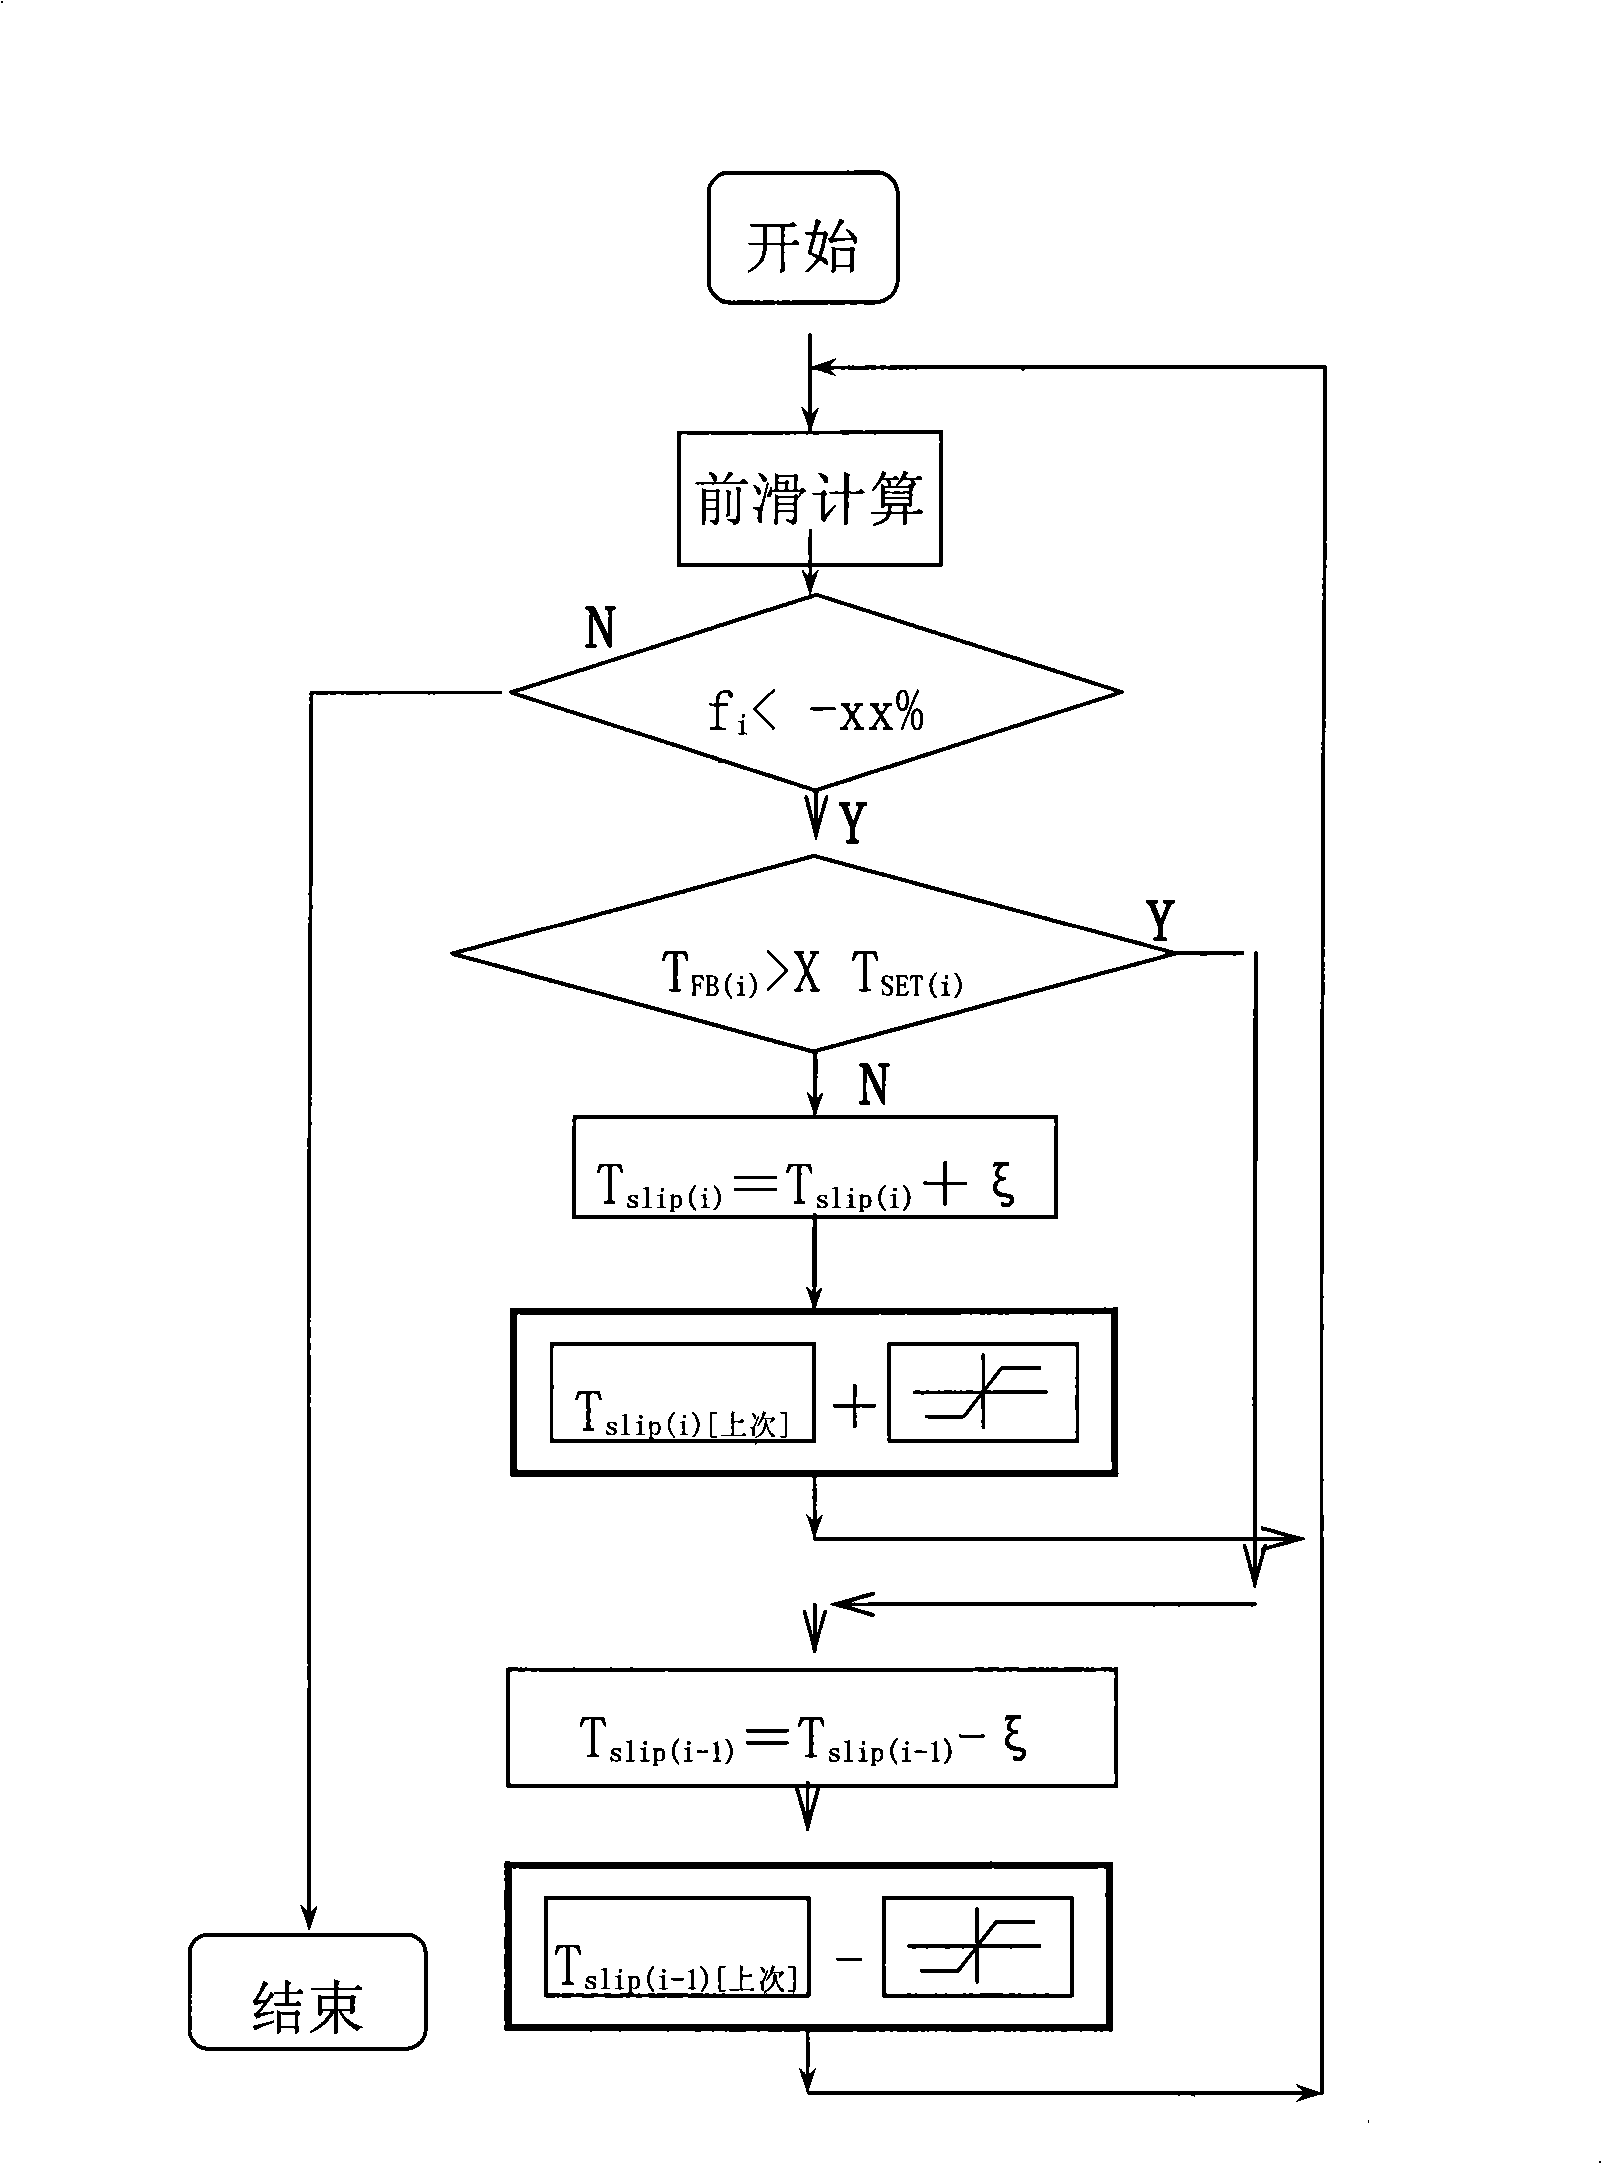 Control method of rolling mill capable of preventing slipping